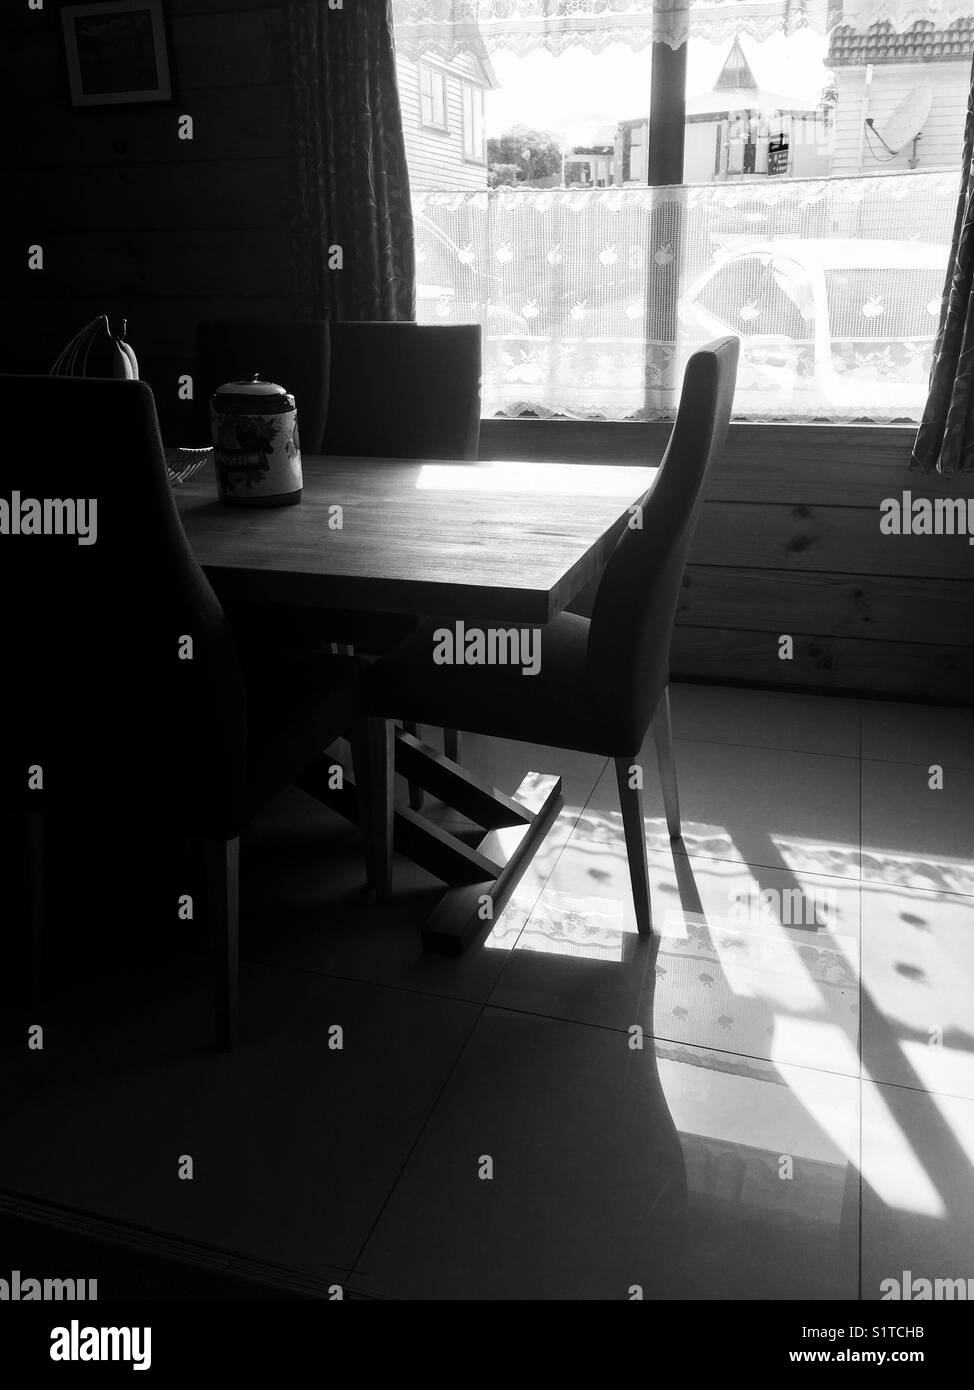 Black and white image of a dining table in the shadows and light of an open window Stock Photo